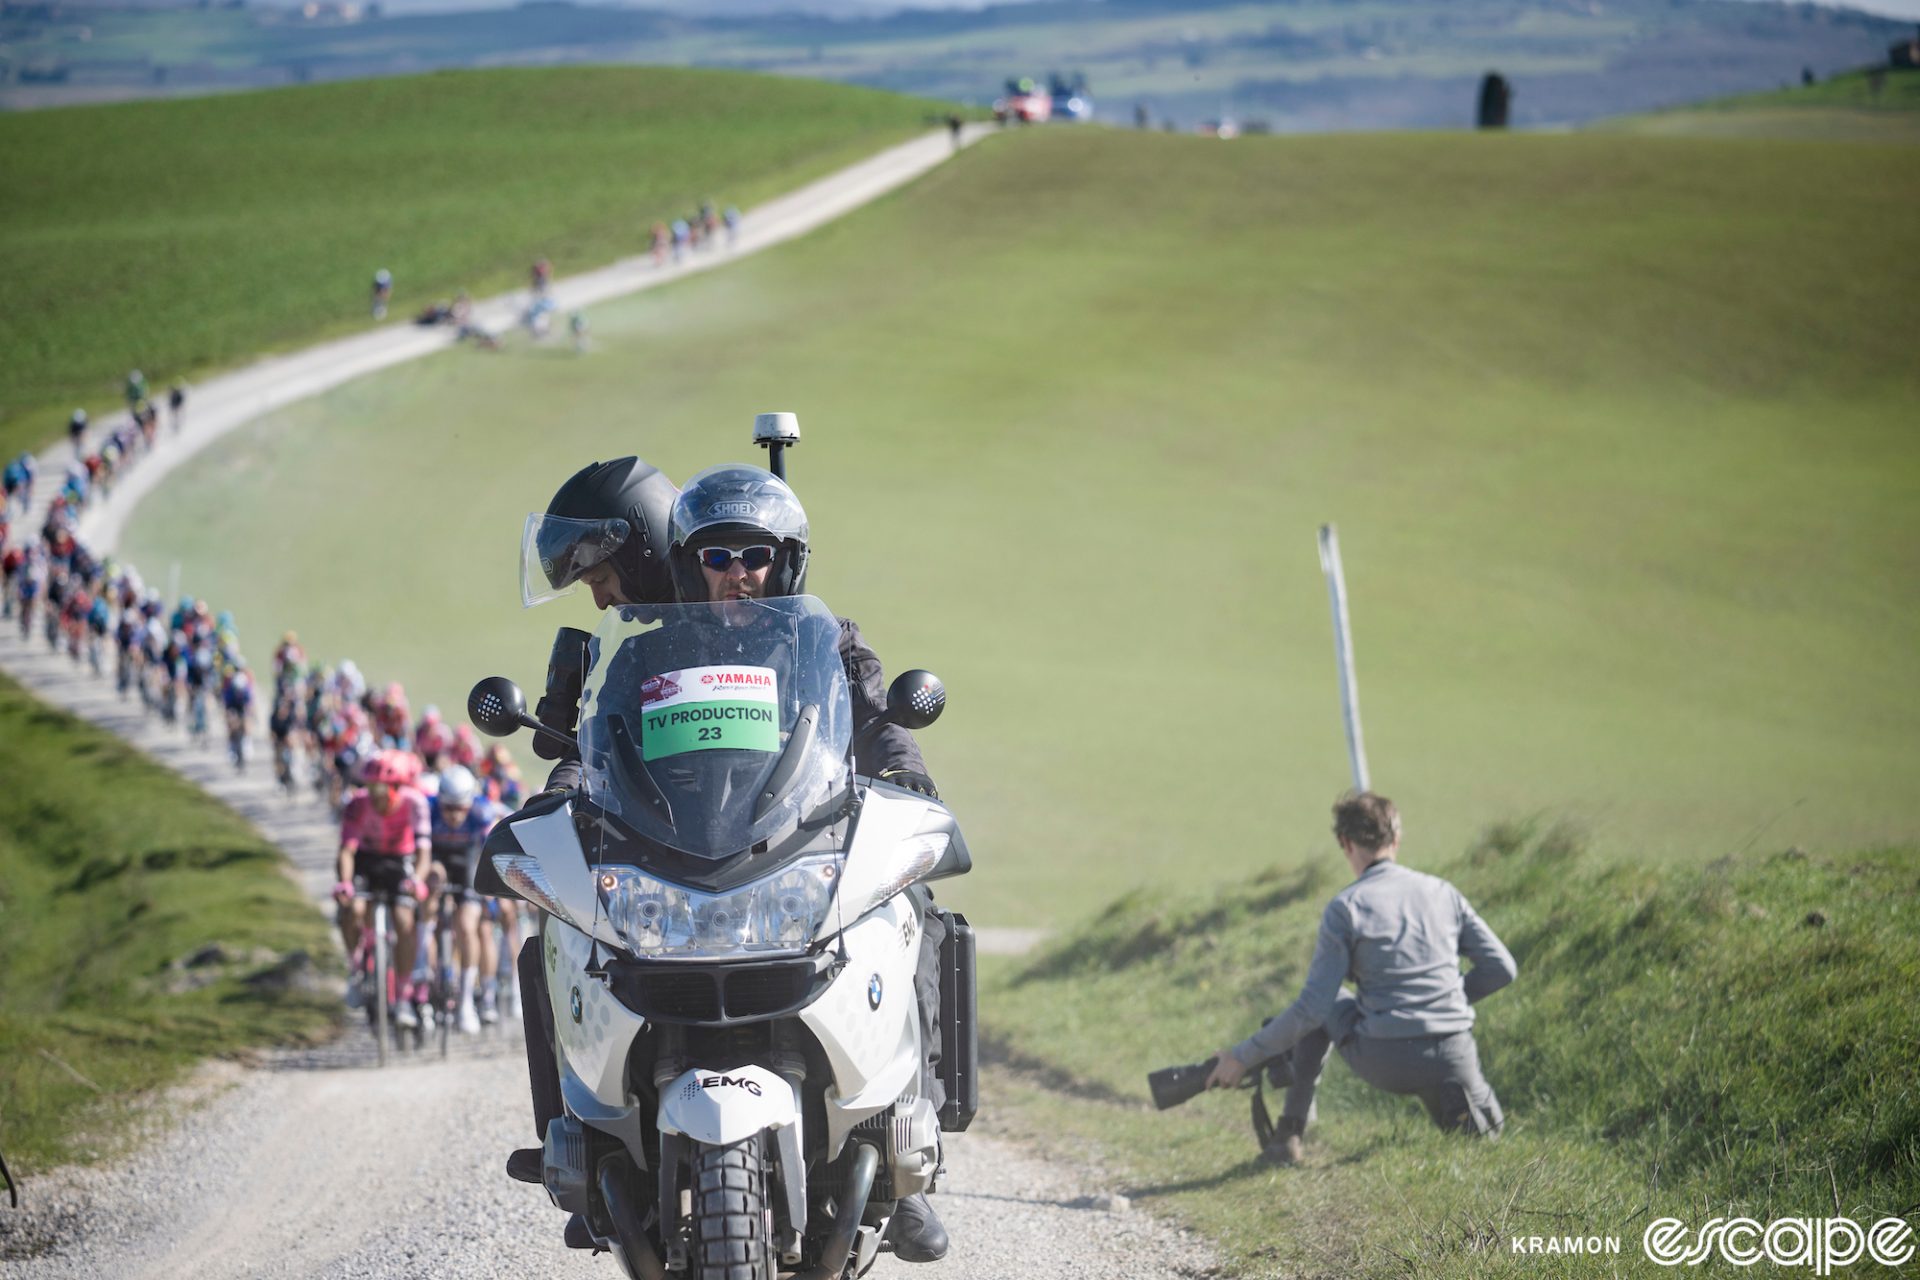 A television camera moto leads the pack at the 2023 Strade Bianche. The cameraman is peering through his eyepiece with the camera aimed back at the pack, which is strung out behind on a winding white gravel road that rolls through green fields.